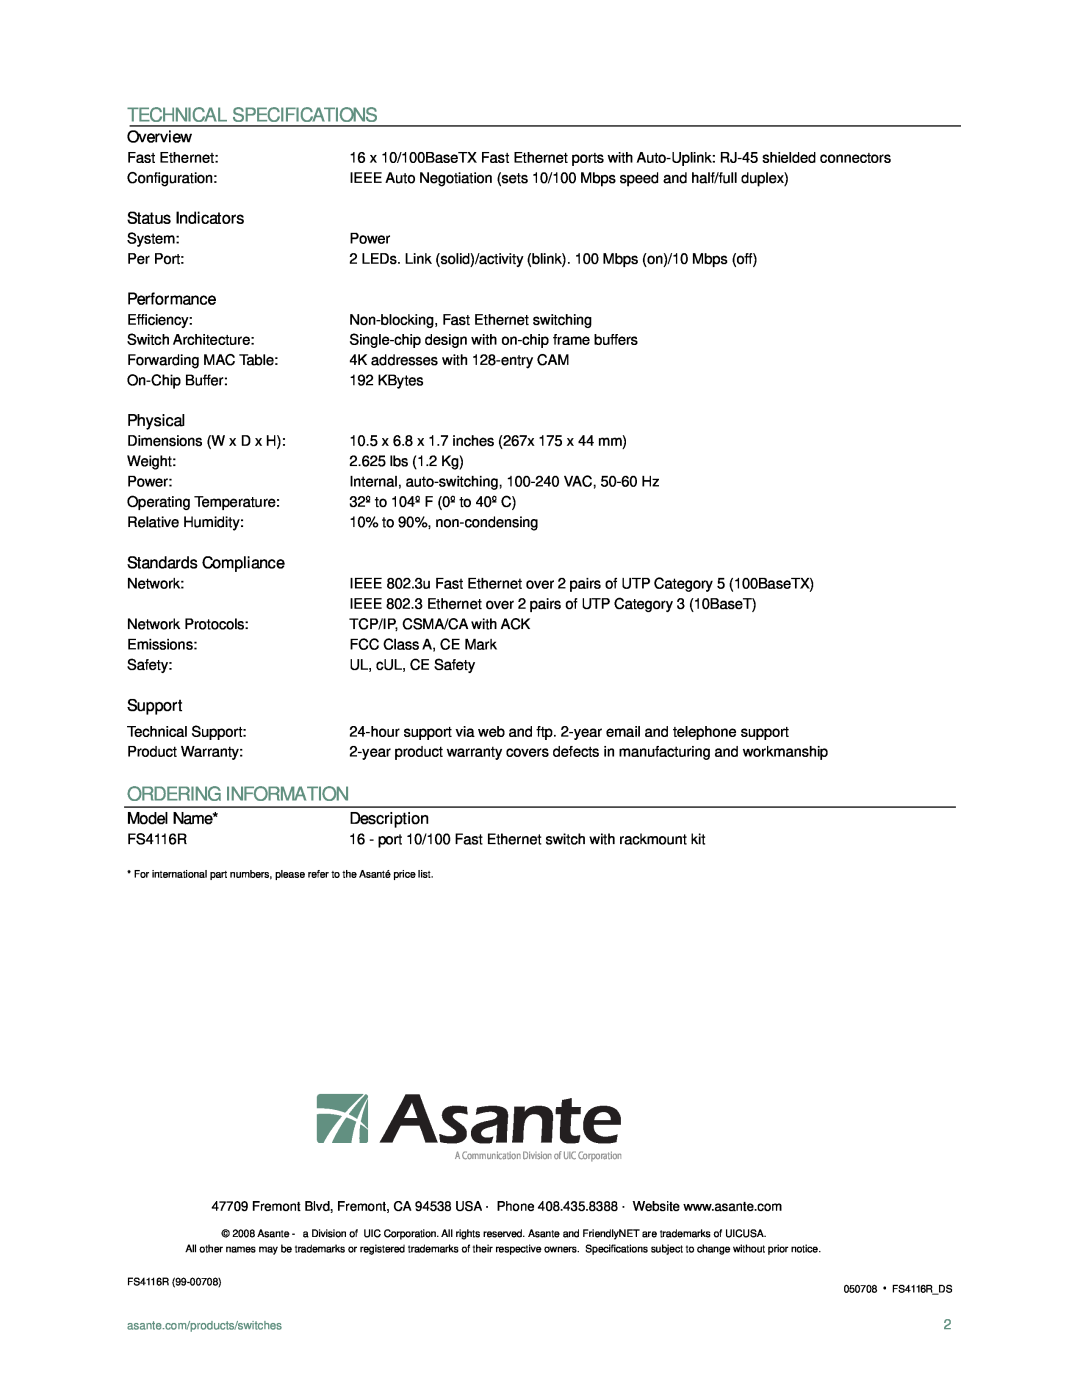 Asante Technologies FS4116R manual Technical Specifications, Ordering Information, Overview, Status Indicators, Performance 